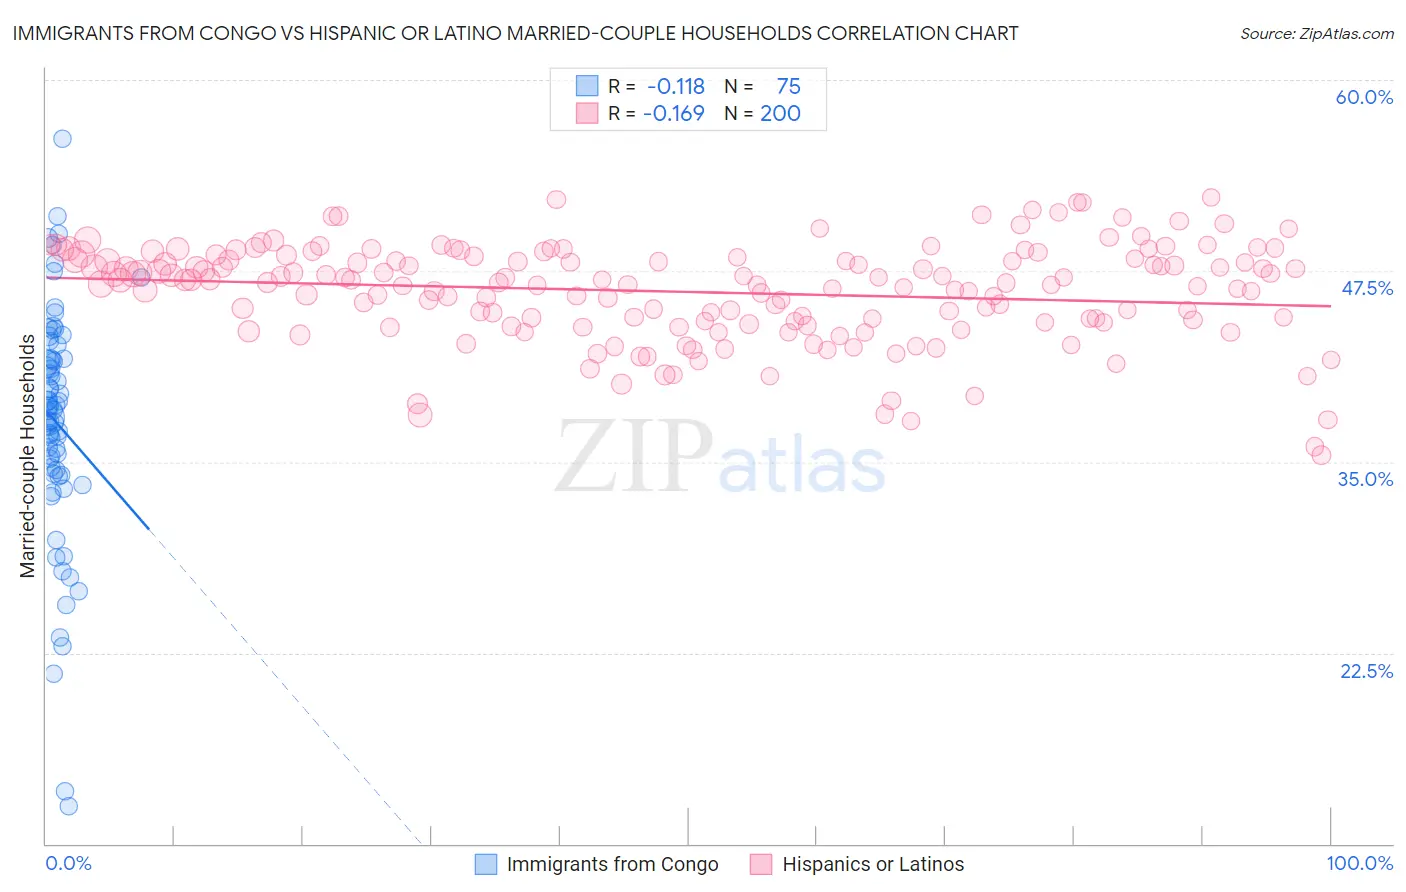 Immigrants from Congo vs Hispanic or Latino Married-couple Households